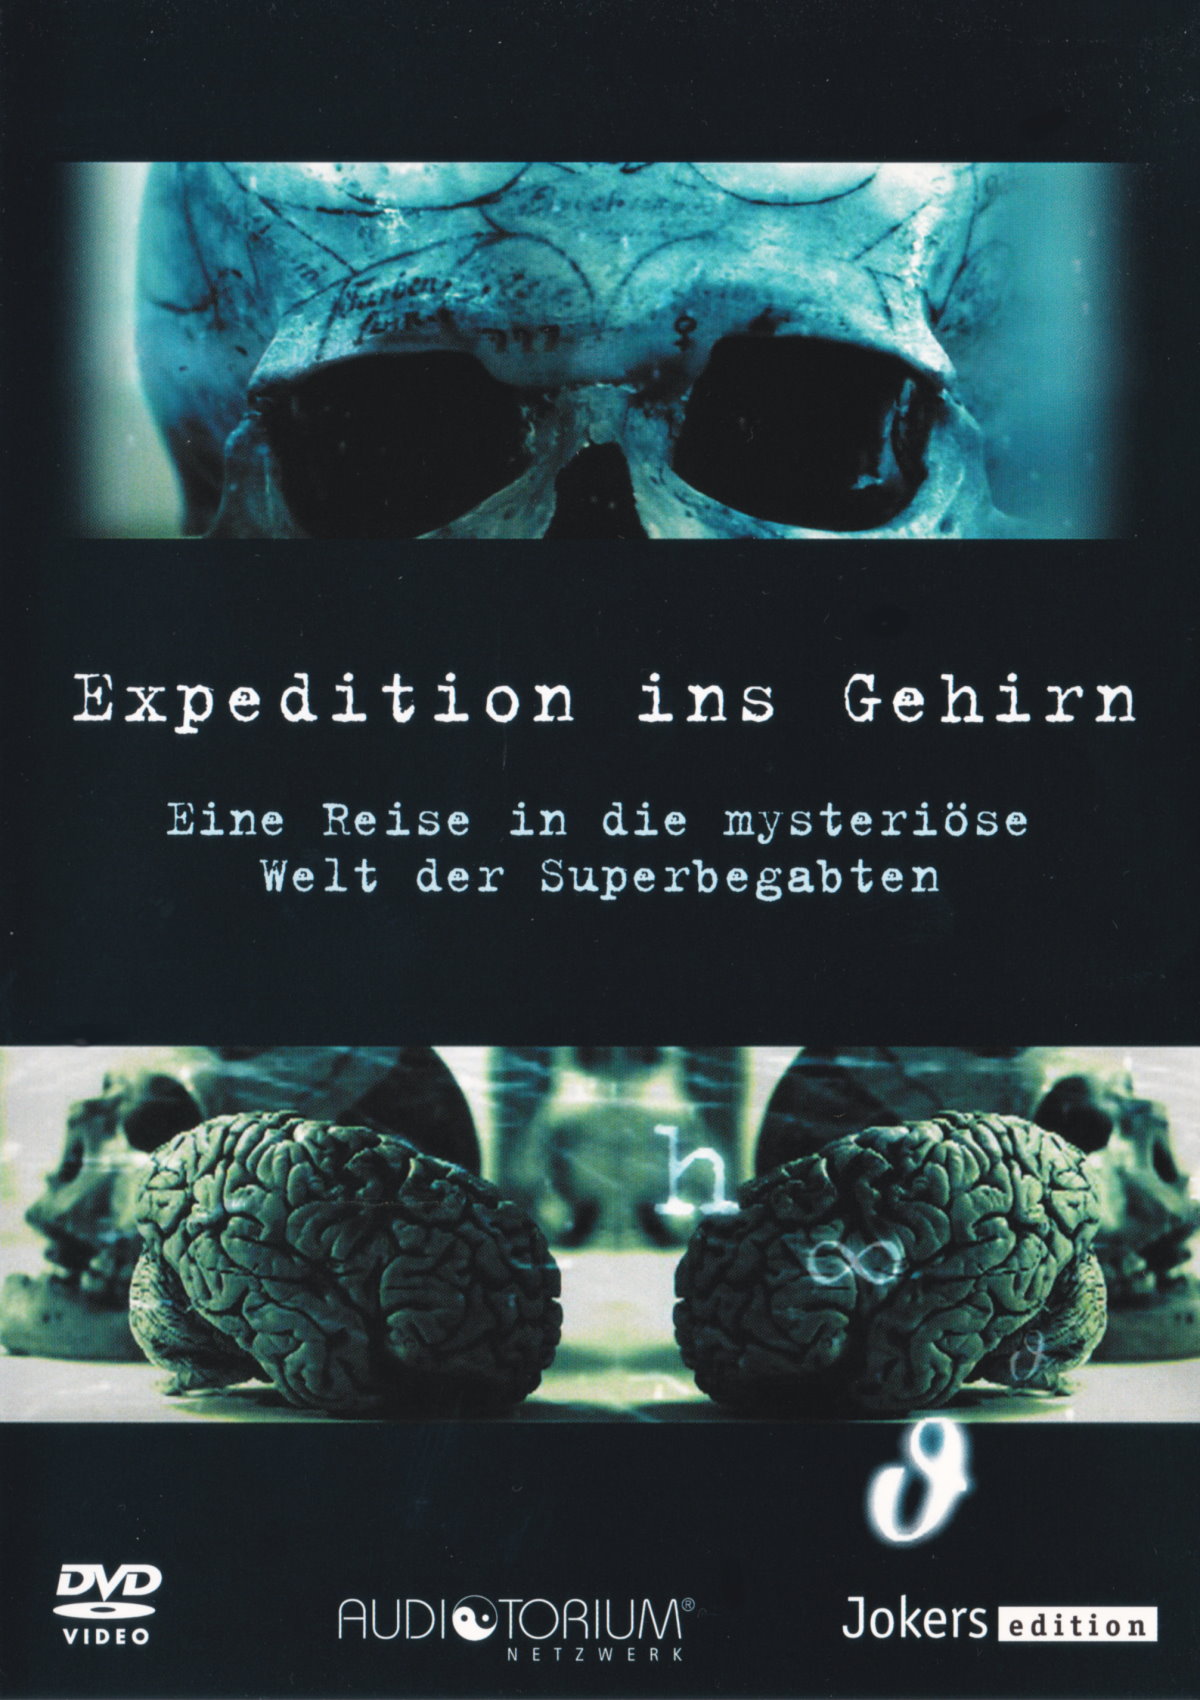 Cover - Expedition ins Gehirn.jpg